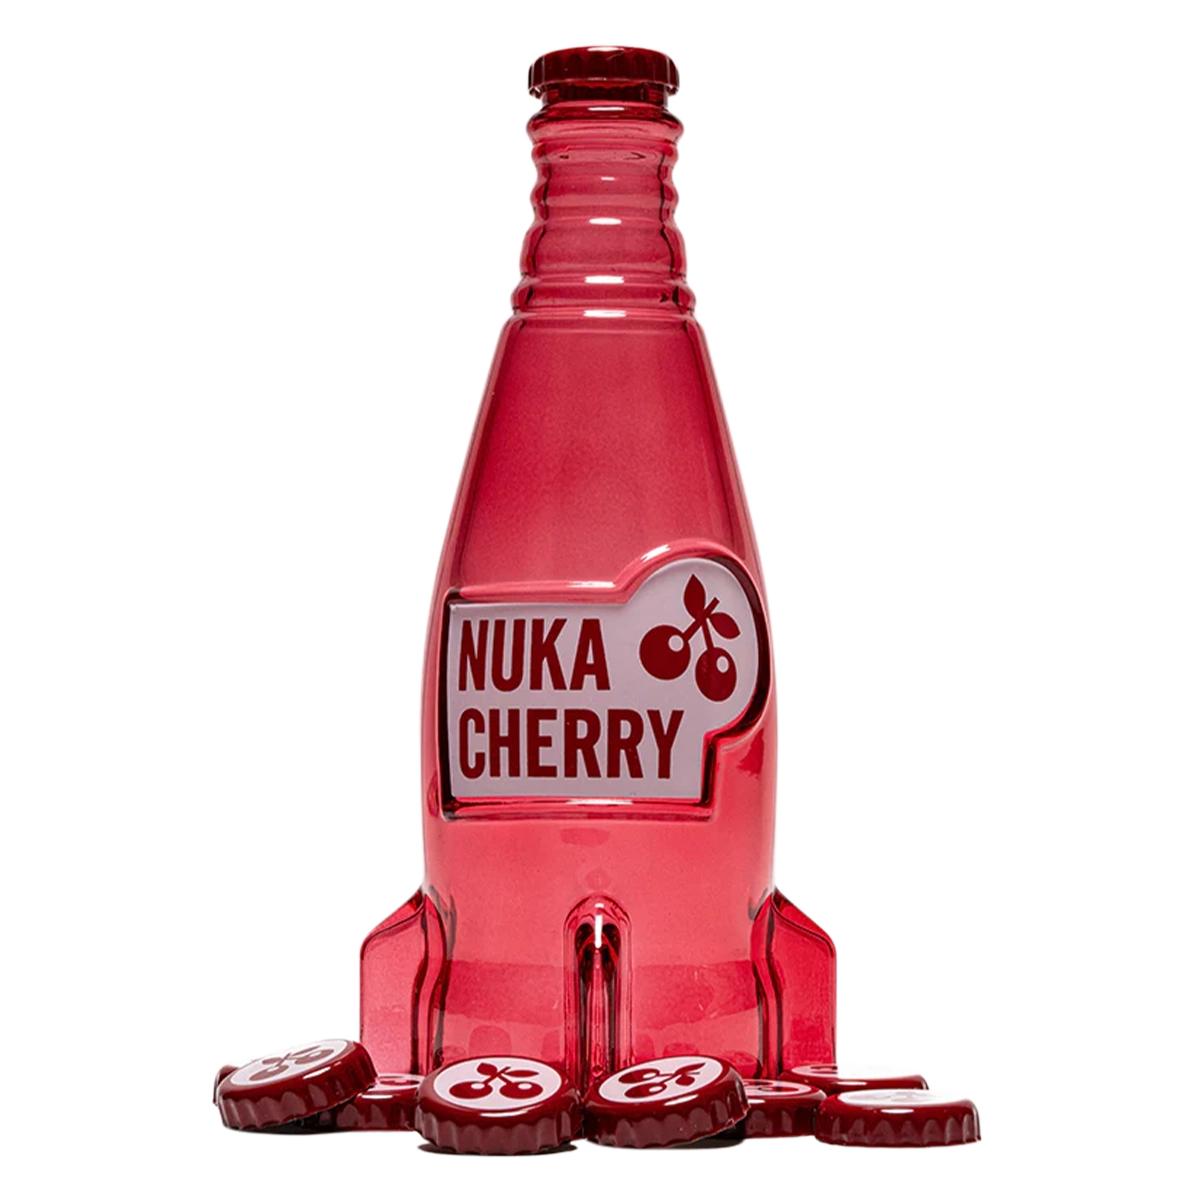 Fallout "Nuka Cola Cherry" Glass Bottle and Caps